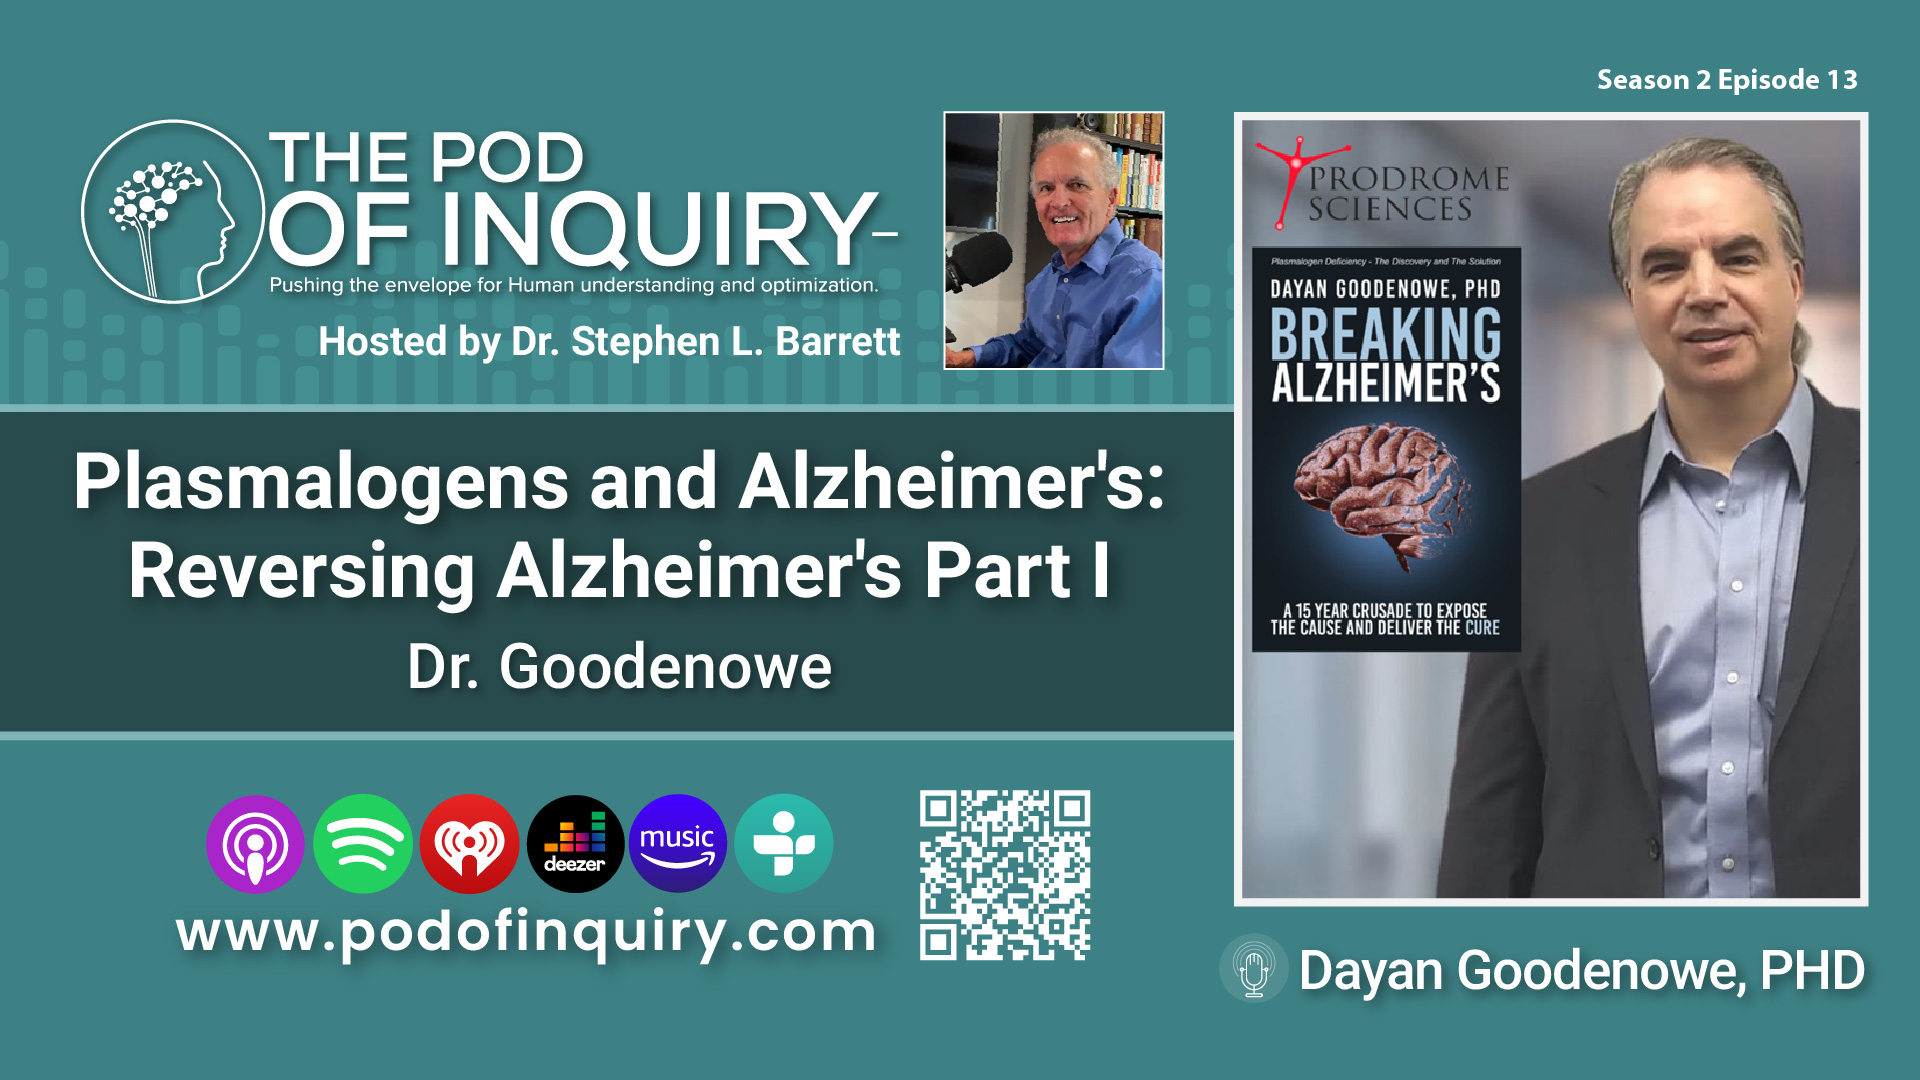 Plasmalogens and Alzheimers 1 - POD of Inquiry - Podcast for Podiatrist